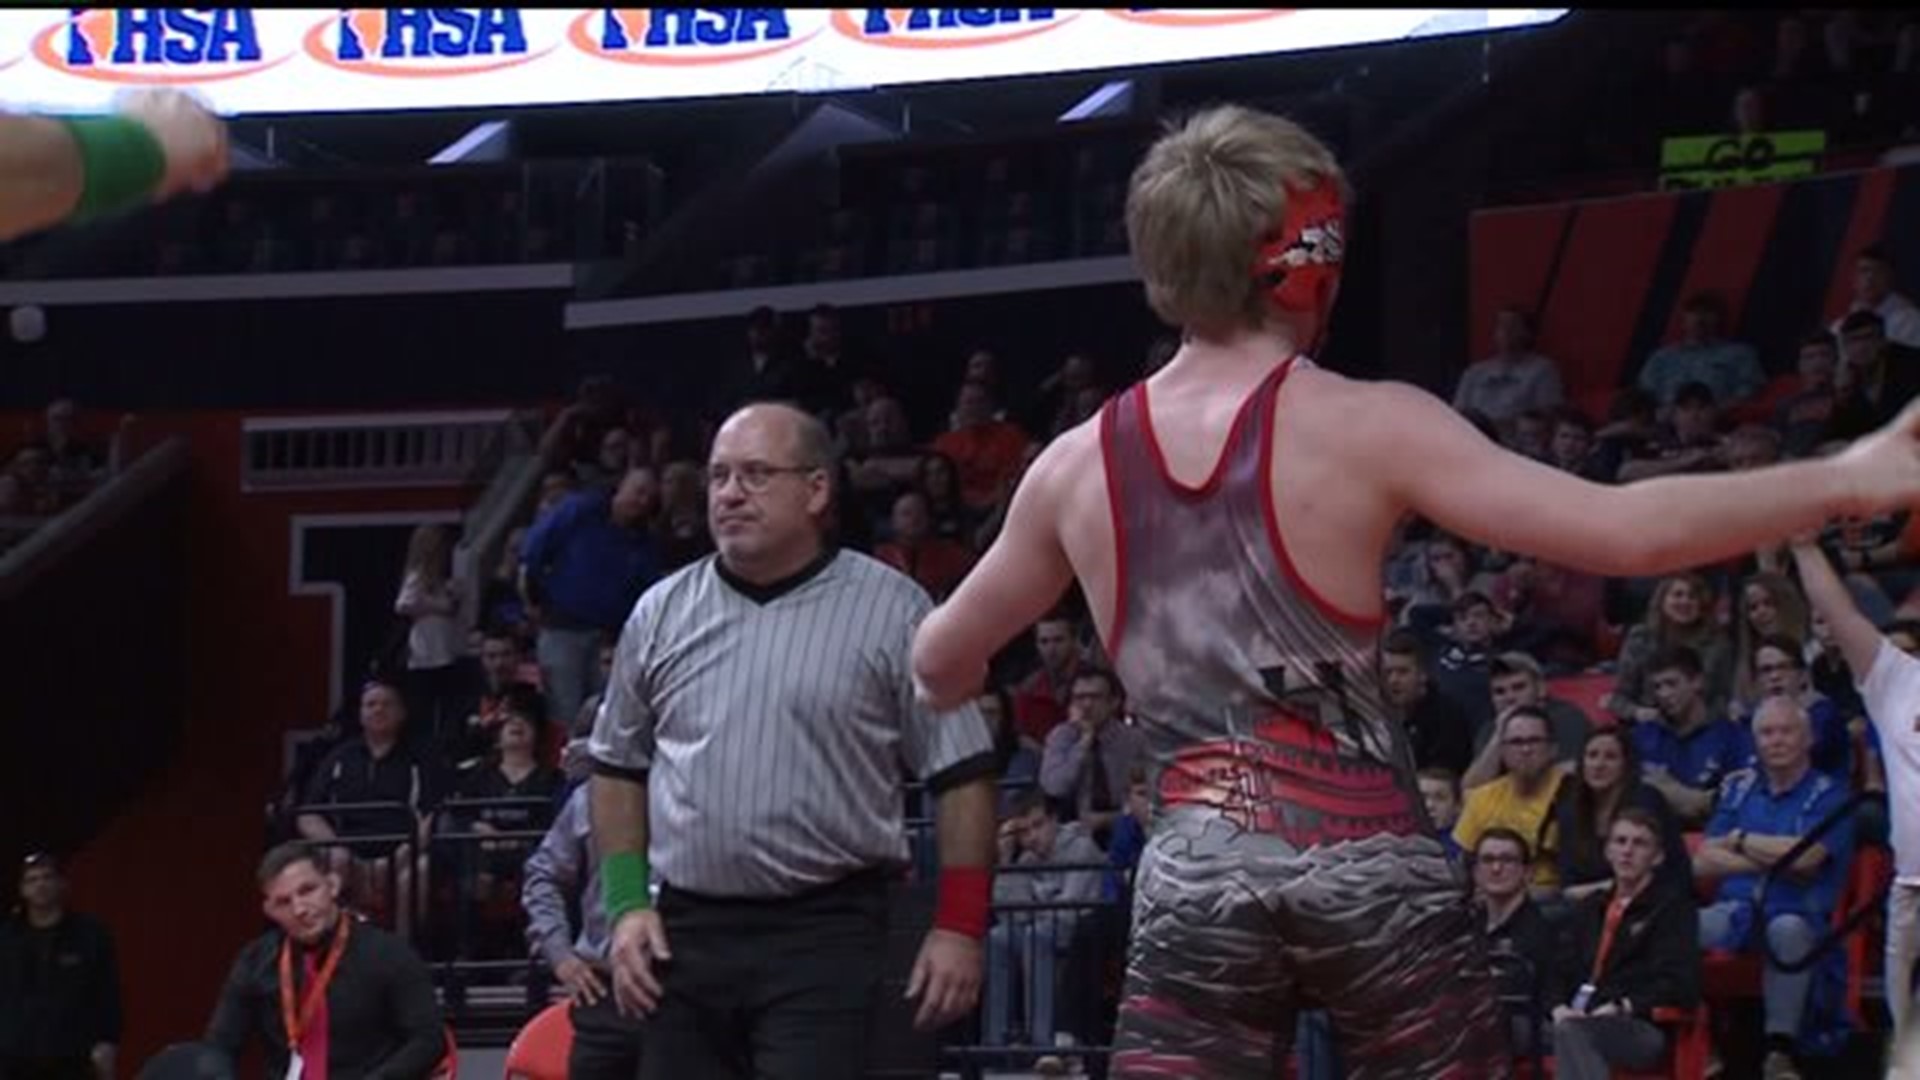 Tyler Fleetwood repeats as State Champion; brother Taylor takes 2nd